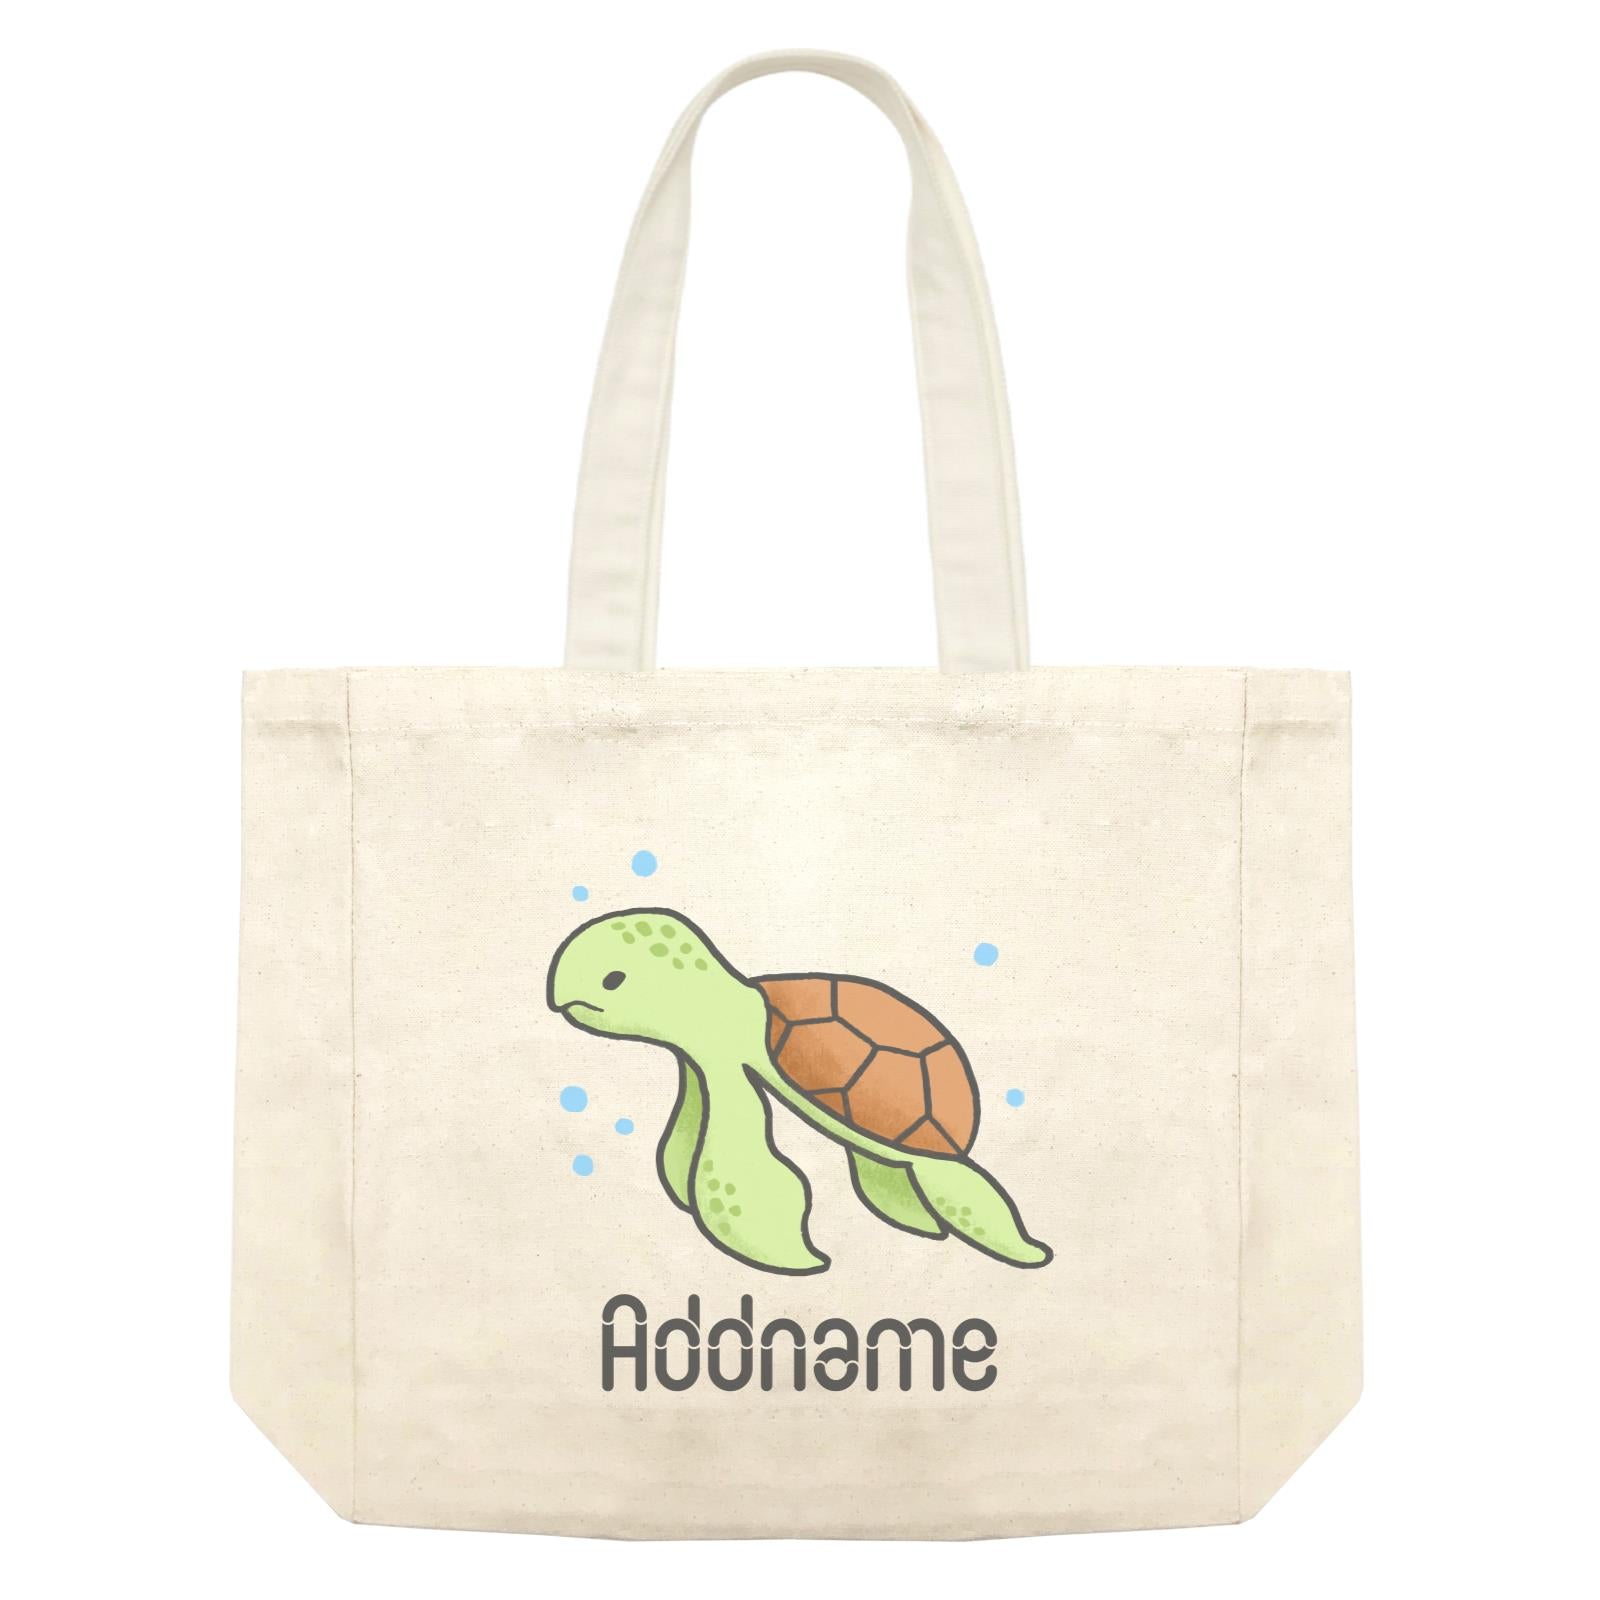 Cute Hand Drawn Style Turtle Addname Shopping Bag